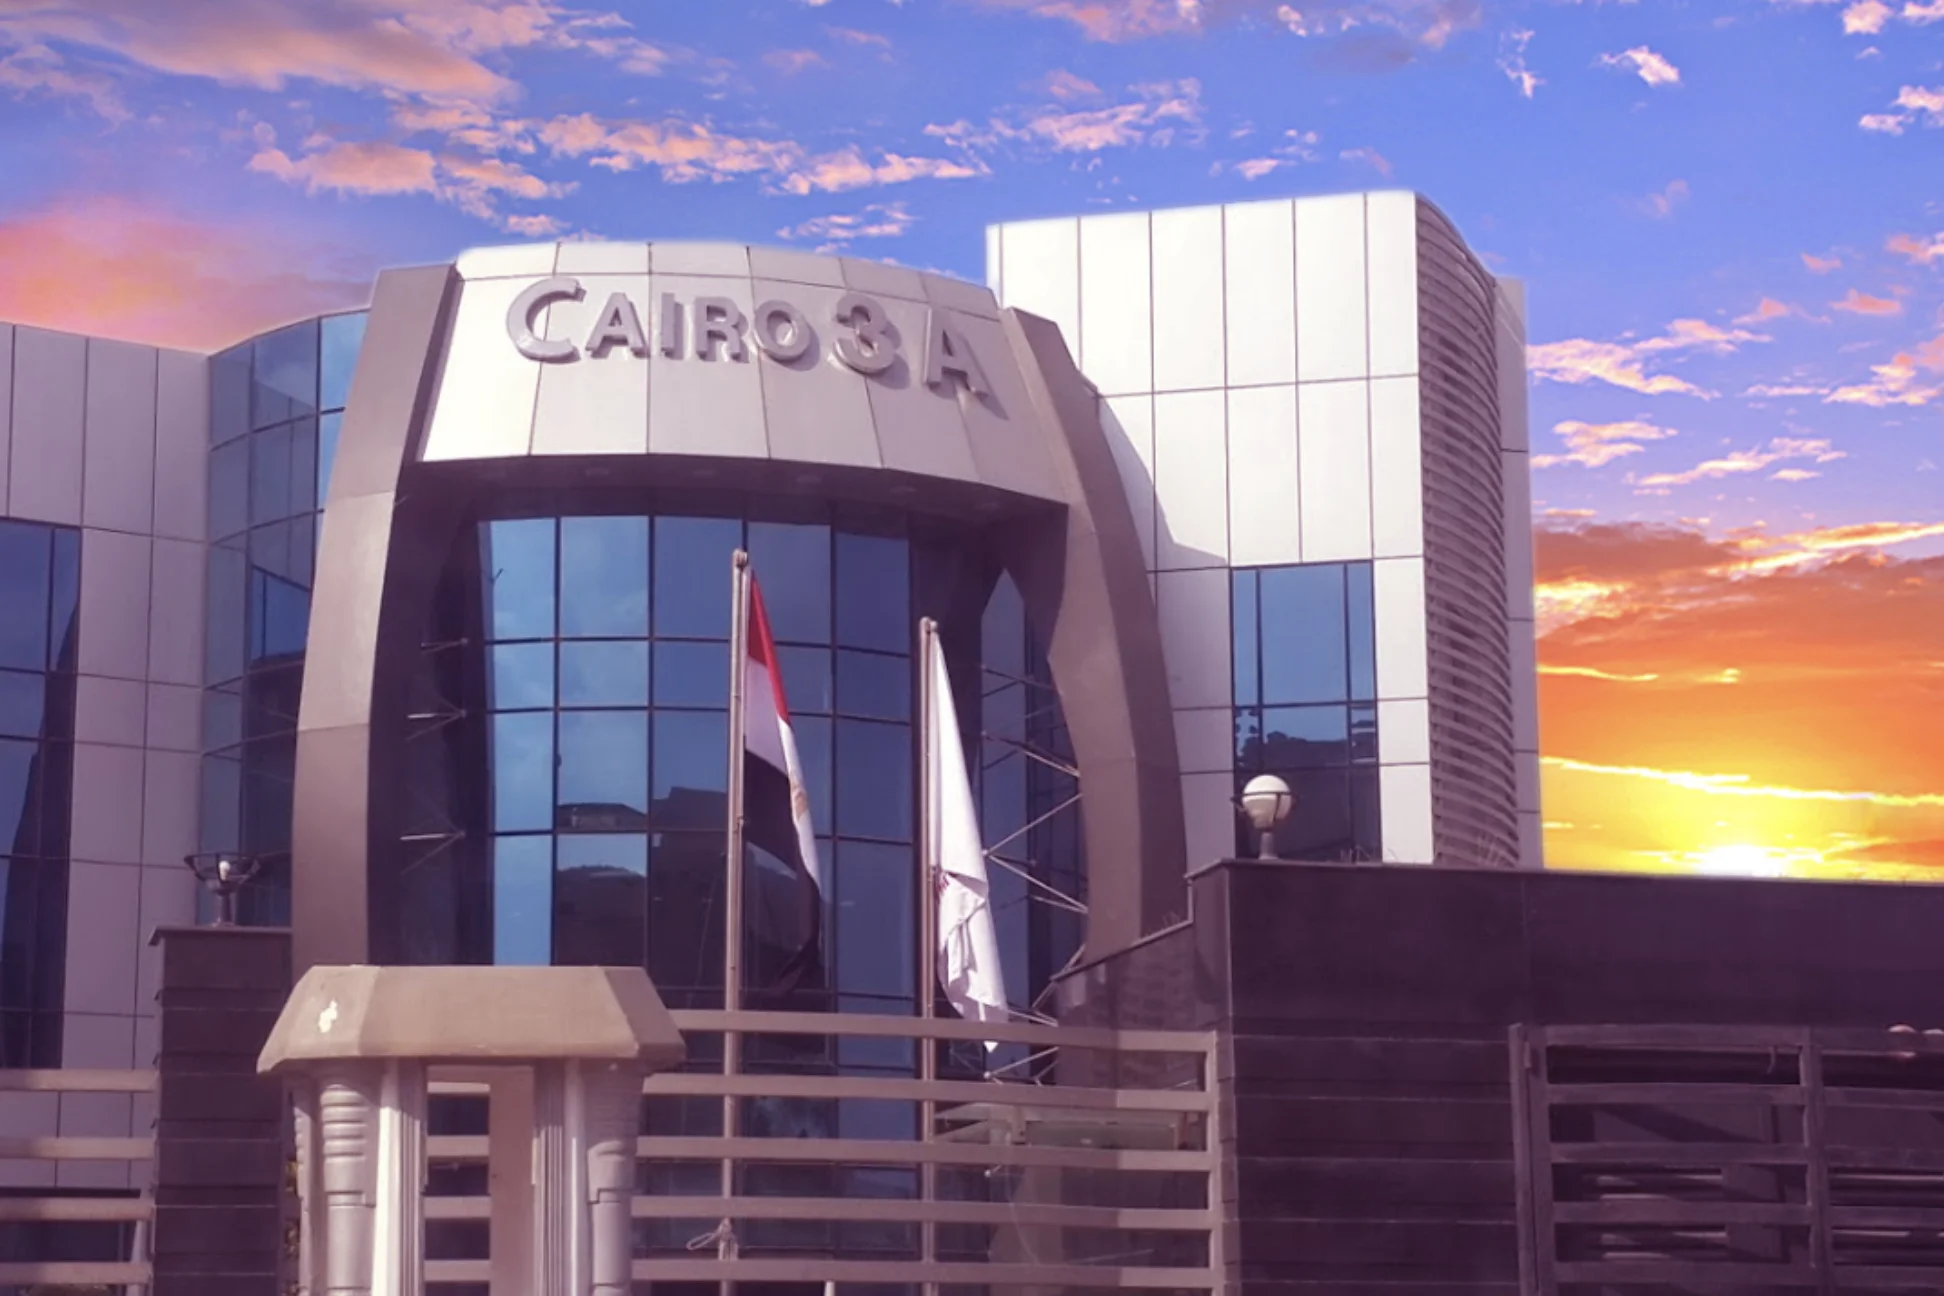 “Cairo 3A” launches CSR campaign and supports the neediest groups